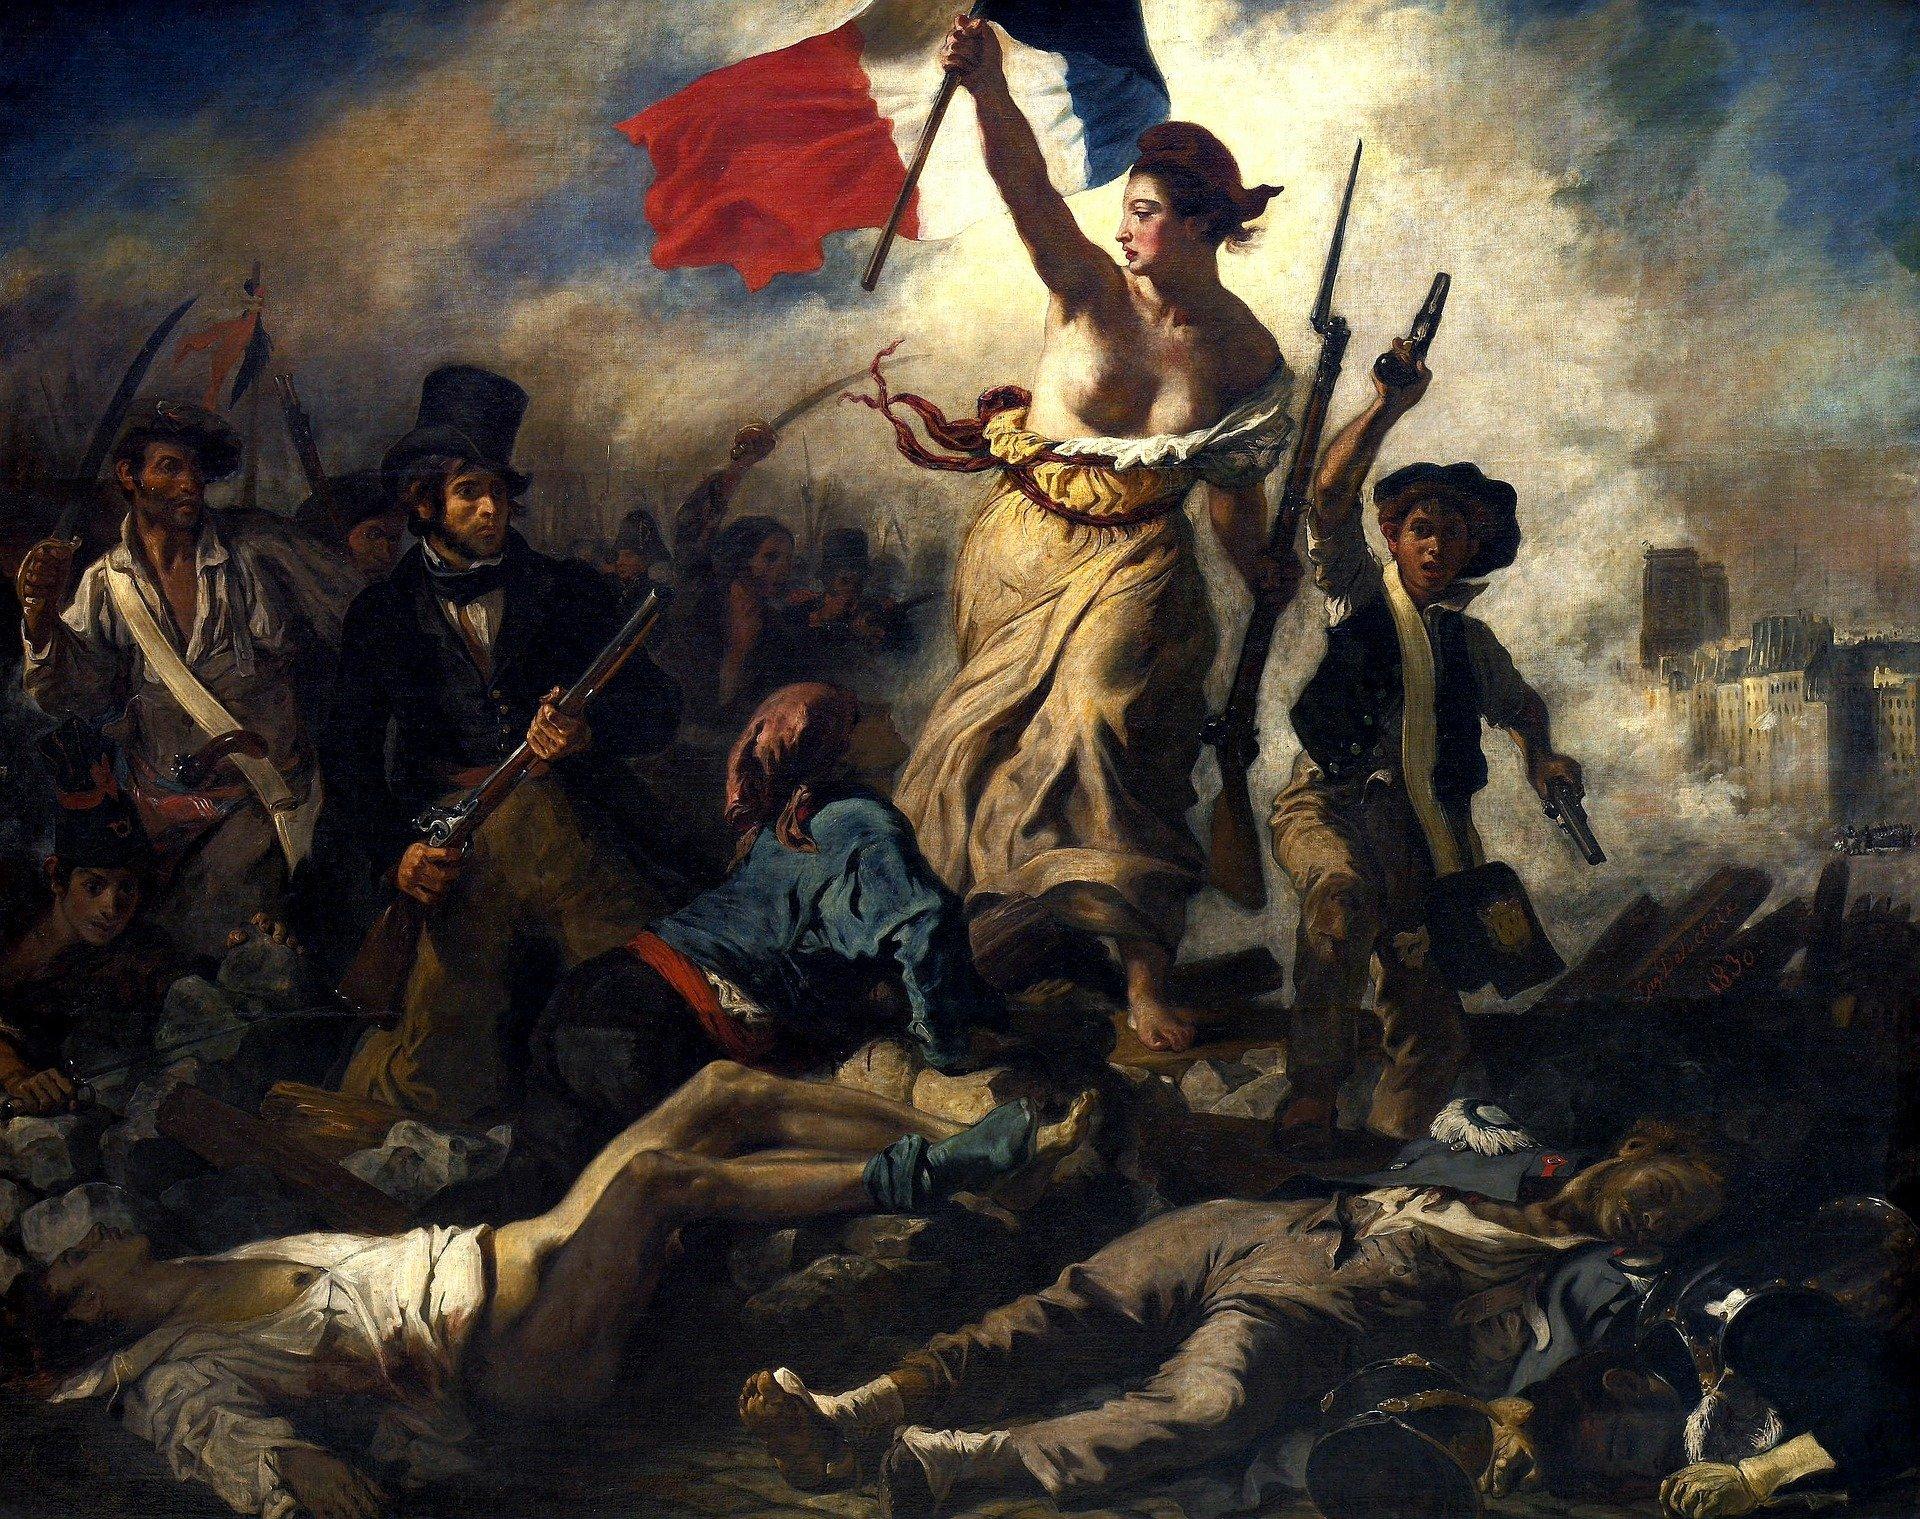 Delacroix and the color at the Delacroix museum